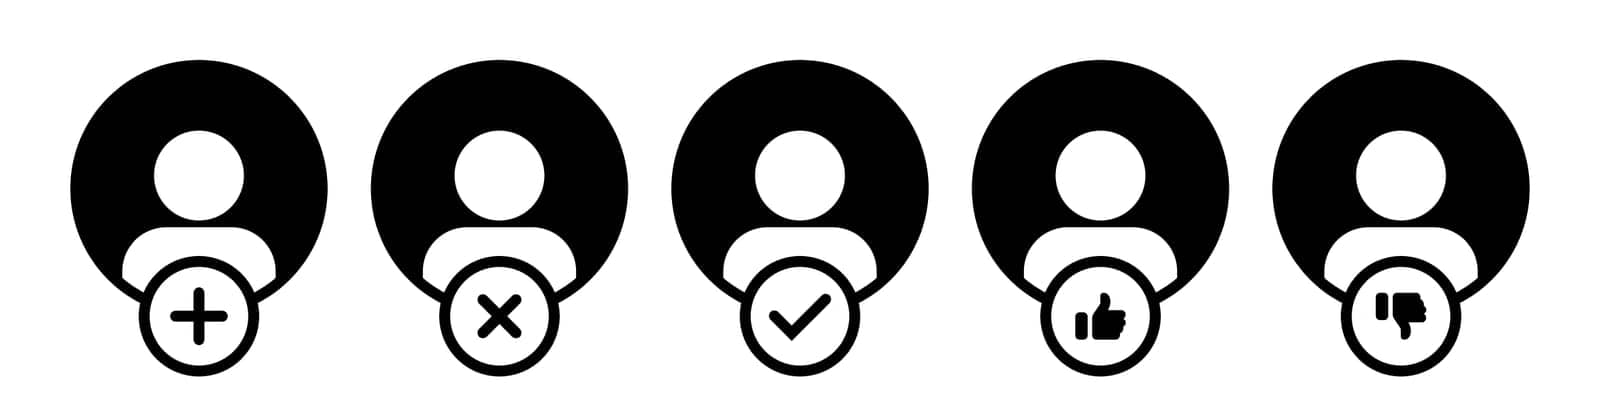 User icon symbol set simple design by misteremil